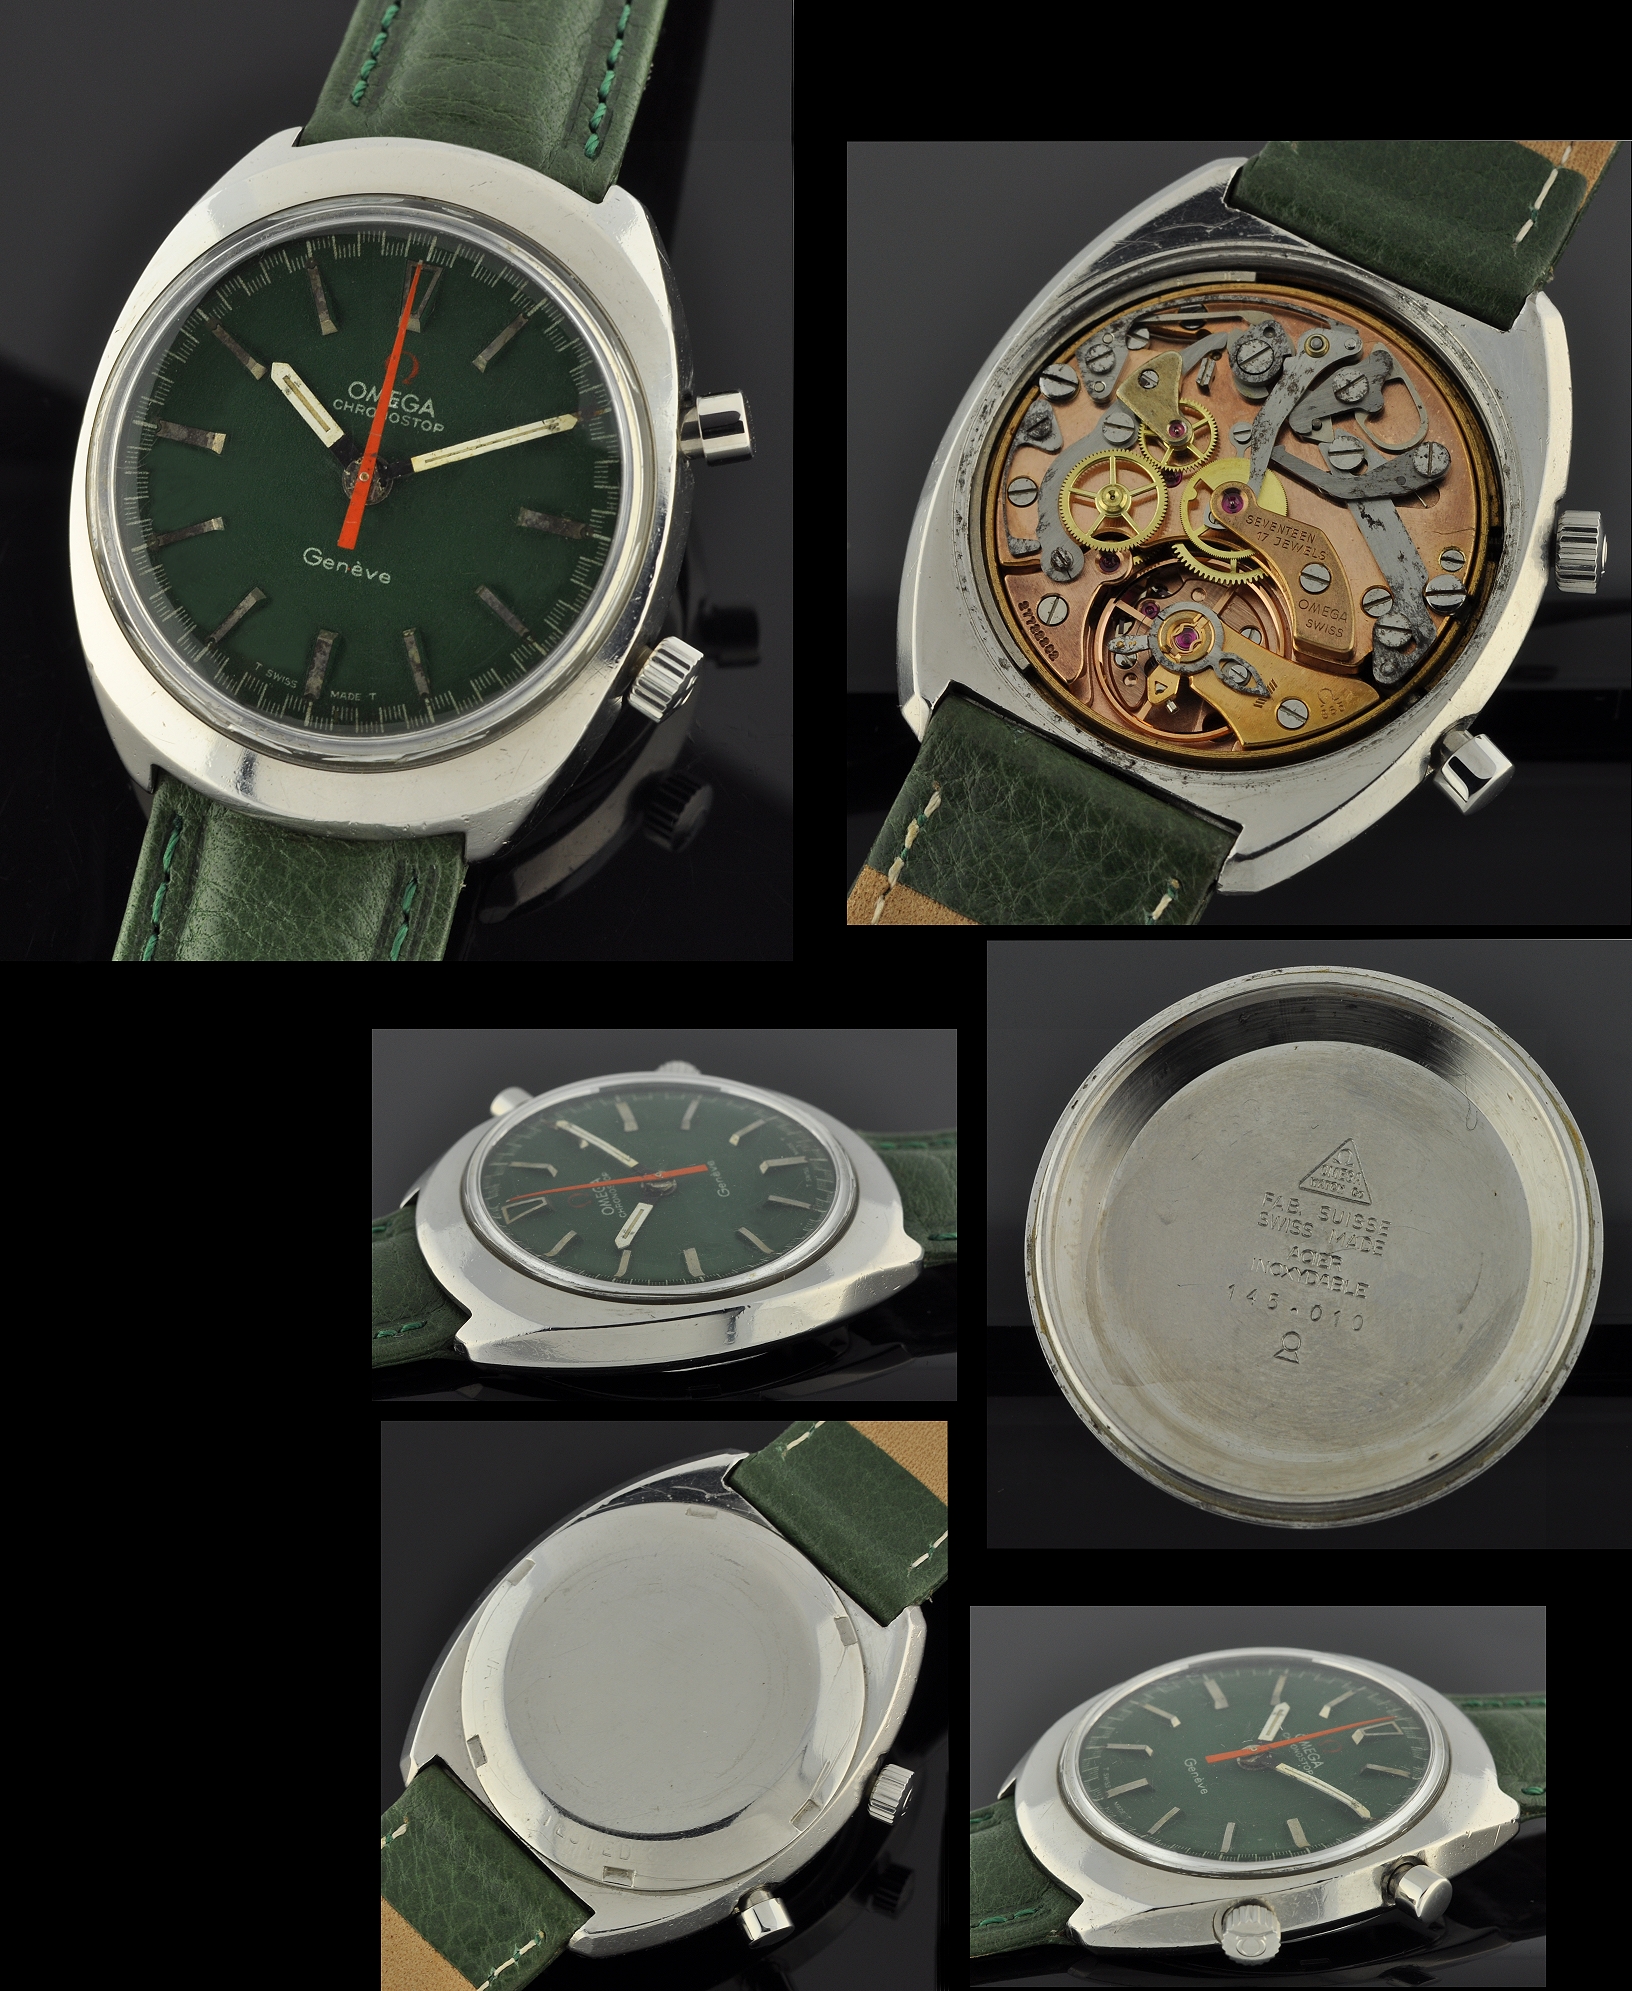 Vintage CHRONOGRAPH watches